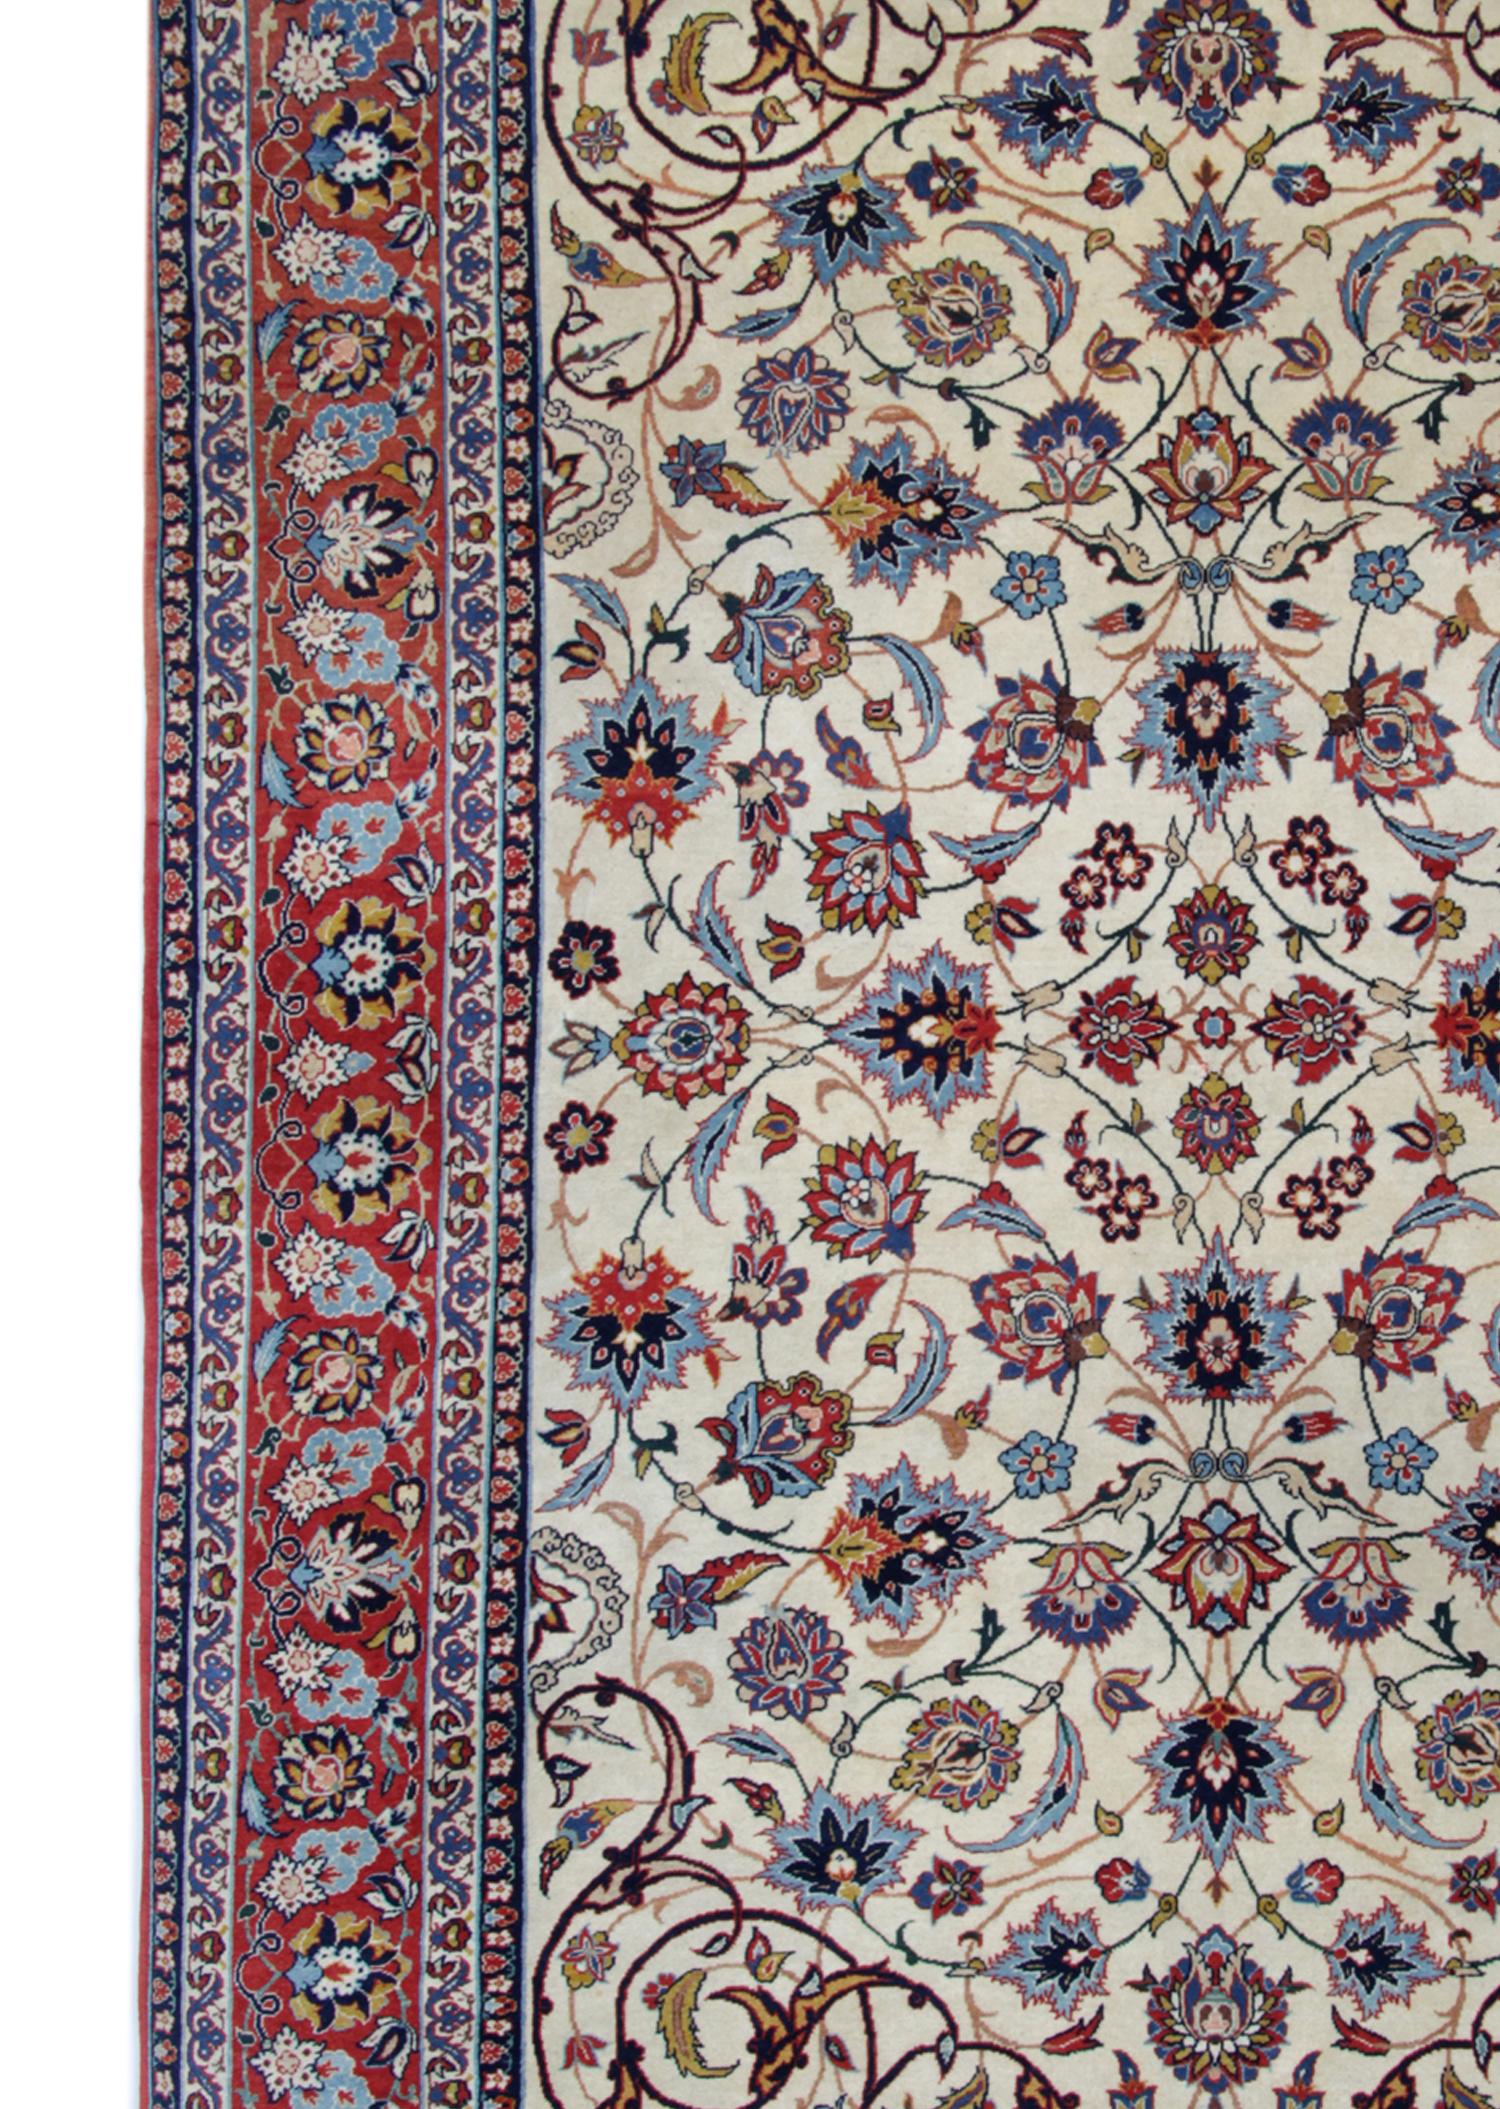 Hand-Crafted Vintage Rugs Floral Kurk Handwoven Oriental Blue Red Cream Carpet Rug 206x139cm  For Sale